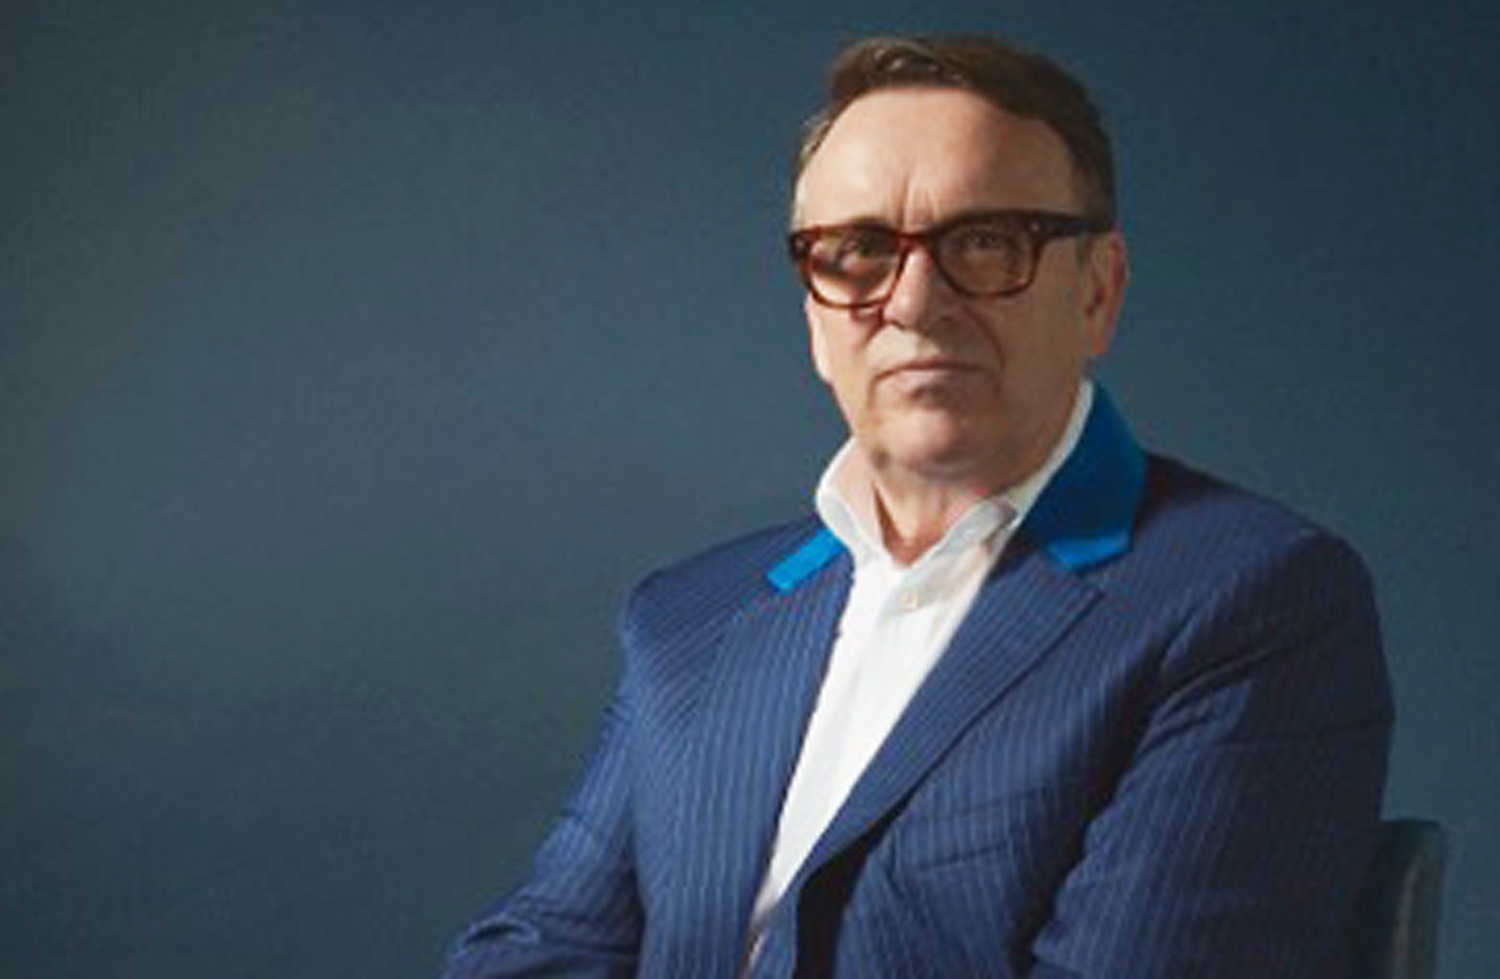 Chrs Difford, The Acoustic Book Tour, comes to Harrogate